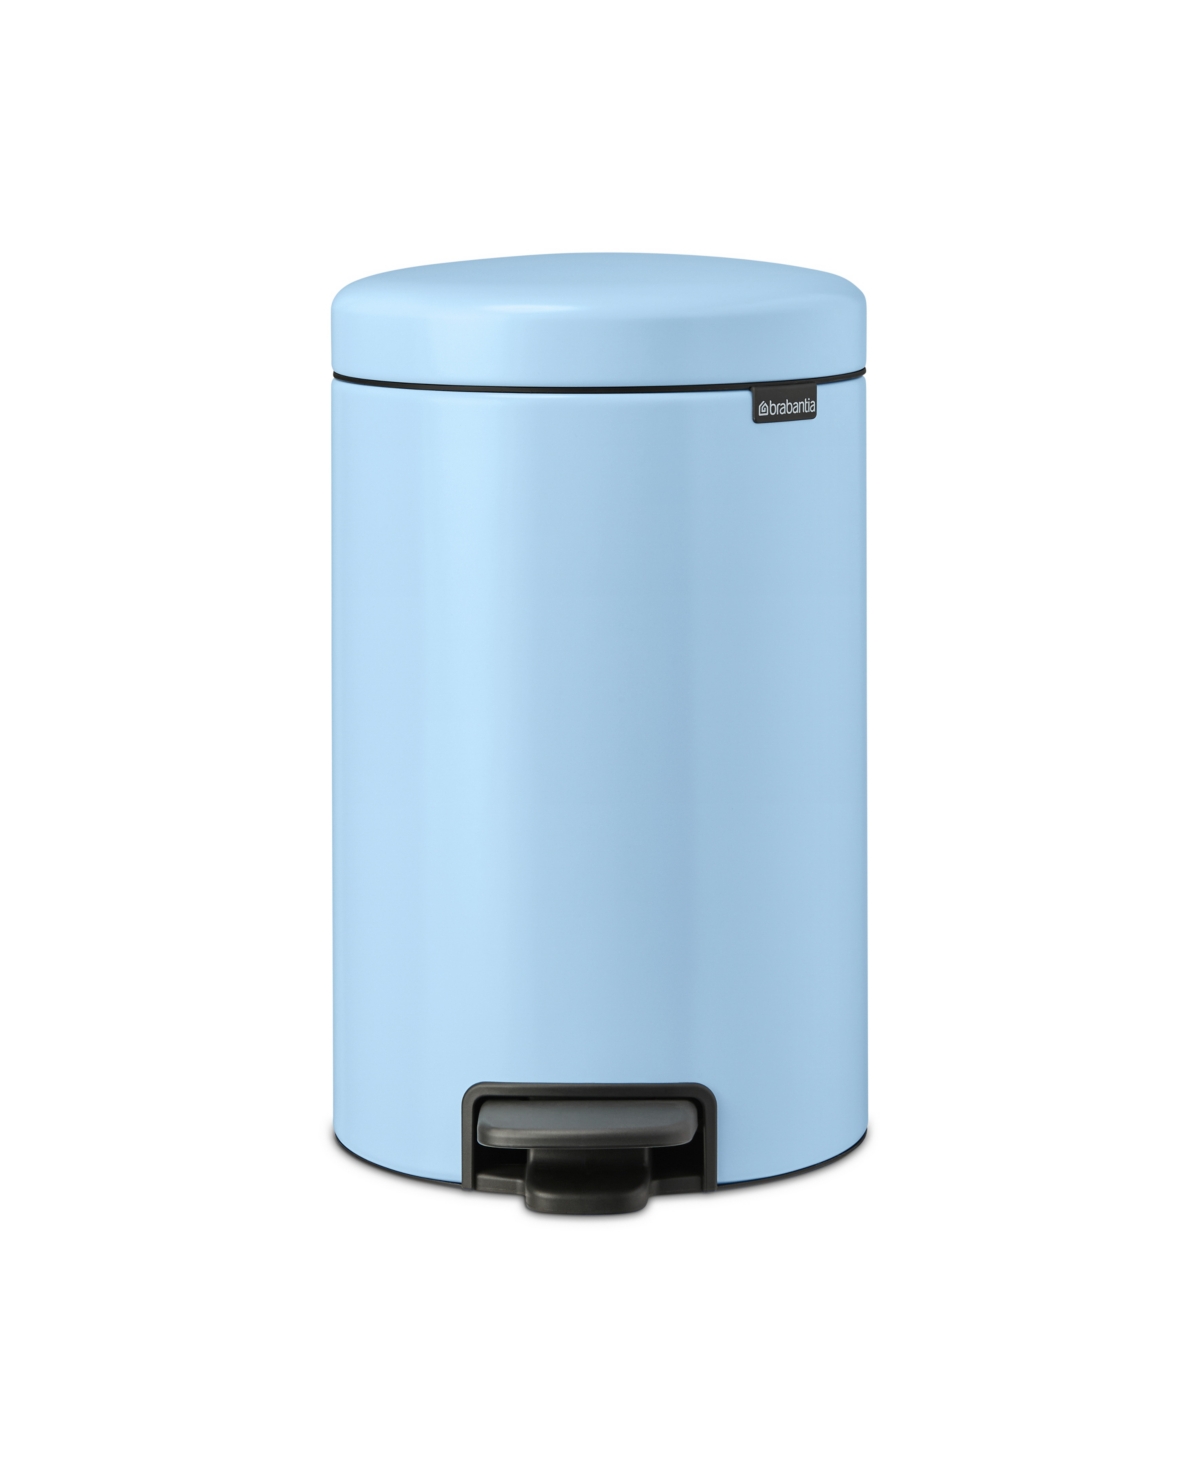 Brabantia New Icon Step On Trash Can, 3.2 Gallon, 12 Liter In Dreamy Blue